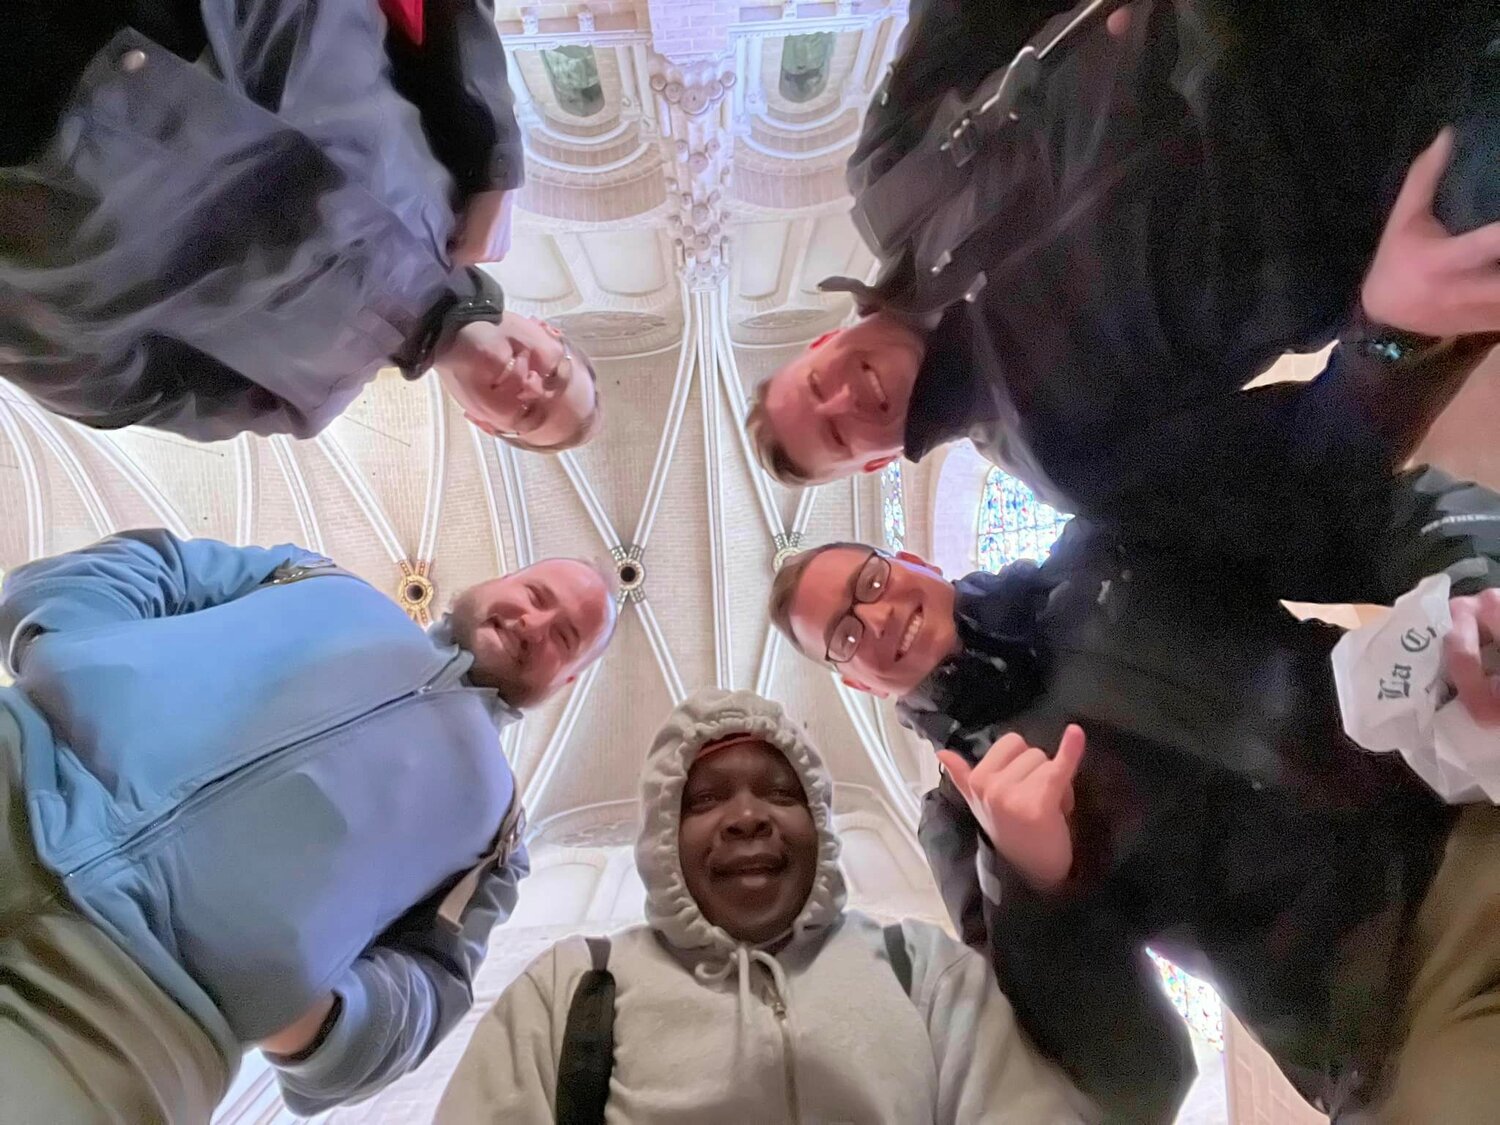 Father Stephen Jones, Father Nicholas Reid, Father Boniface Kasiita Nzabonimpa, Father Paul Clark and Father Dylan Schrader gather for a photo in the Cathedral of Our Lady (Notre Dame) in Chartres, France.